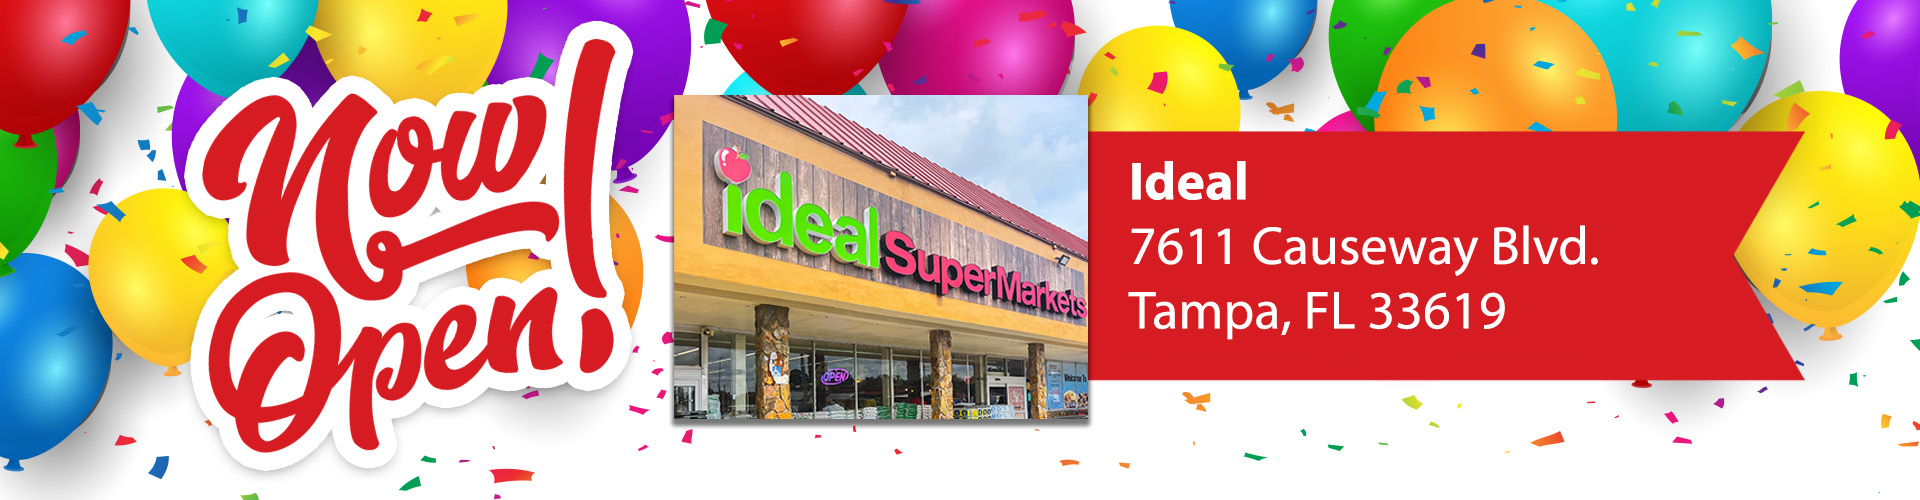 Click this image to get directions to our new store located in 7611 Causeway Blvd Tampa FL